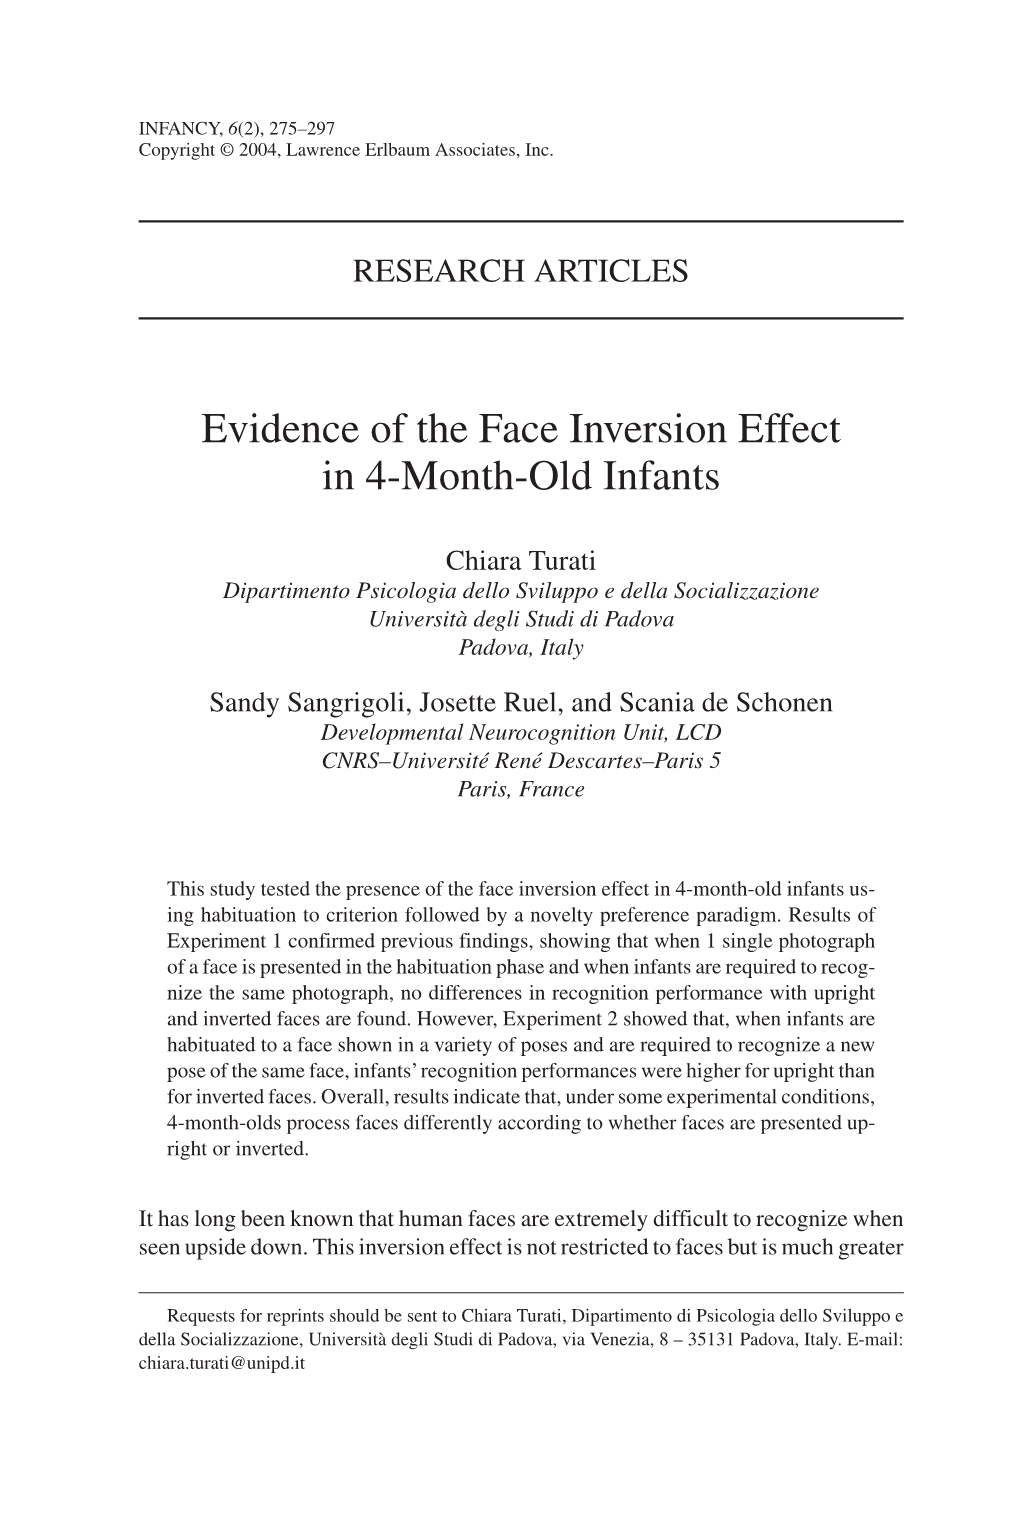 Evidence of the Face Inversion Effect in 4-Month-Old Infants